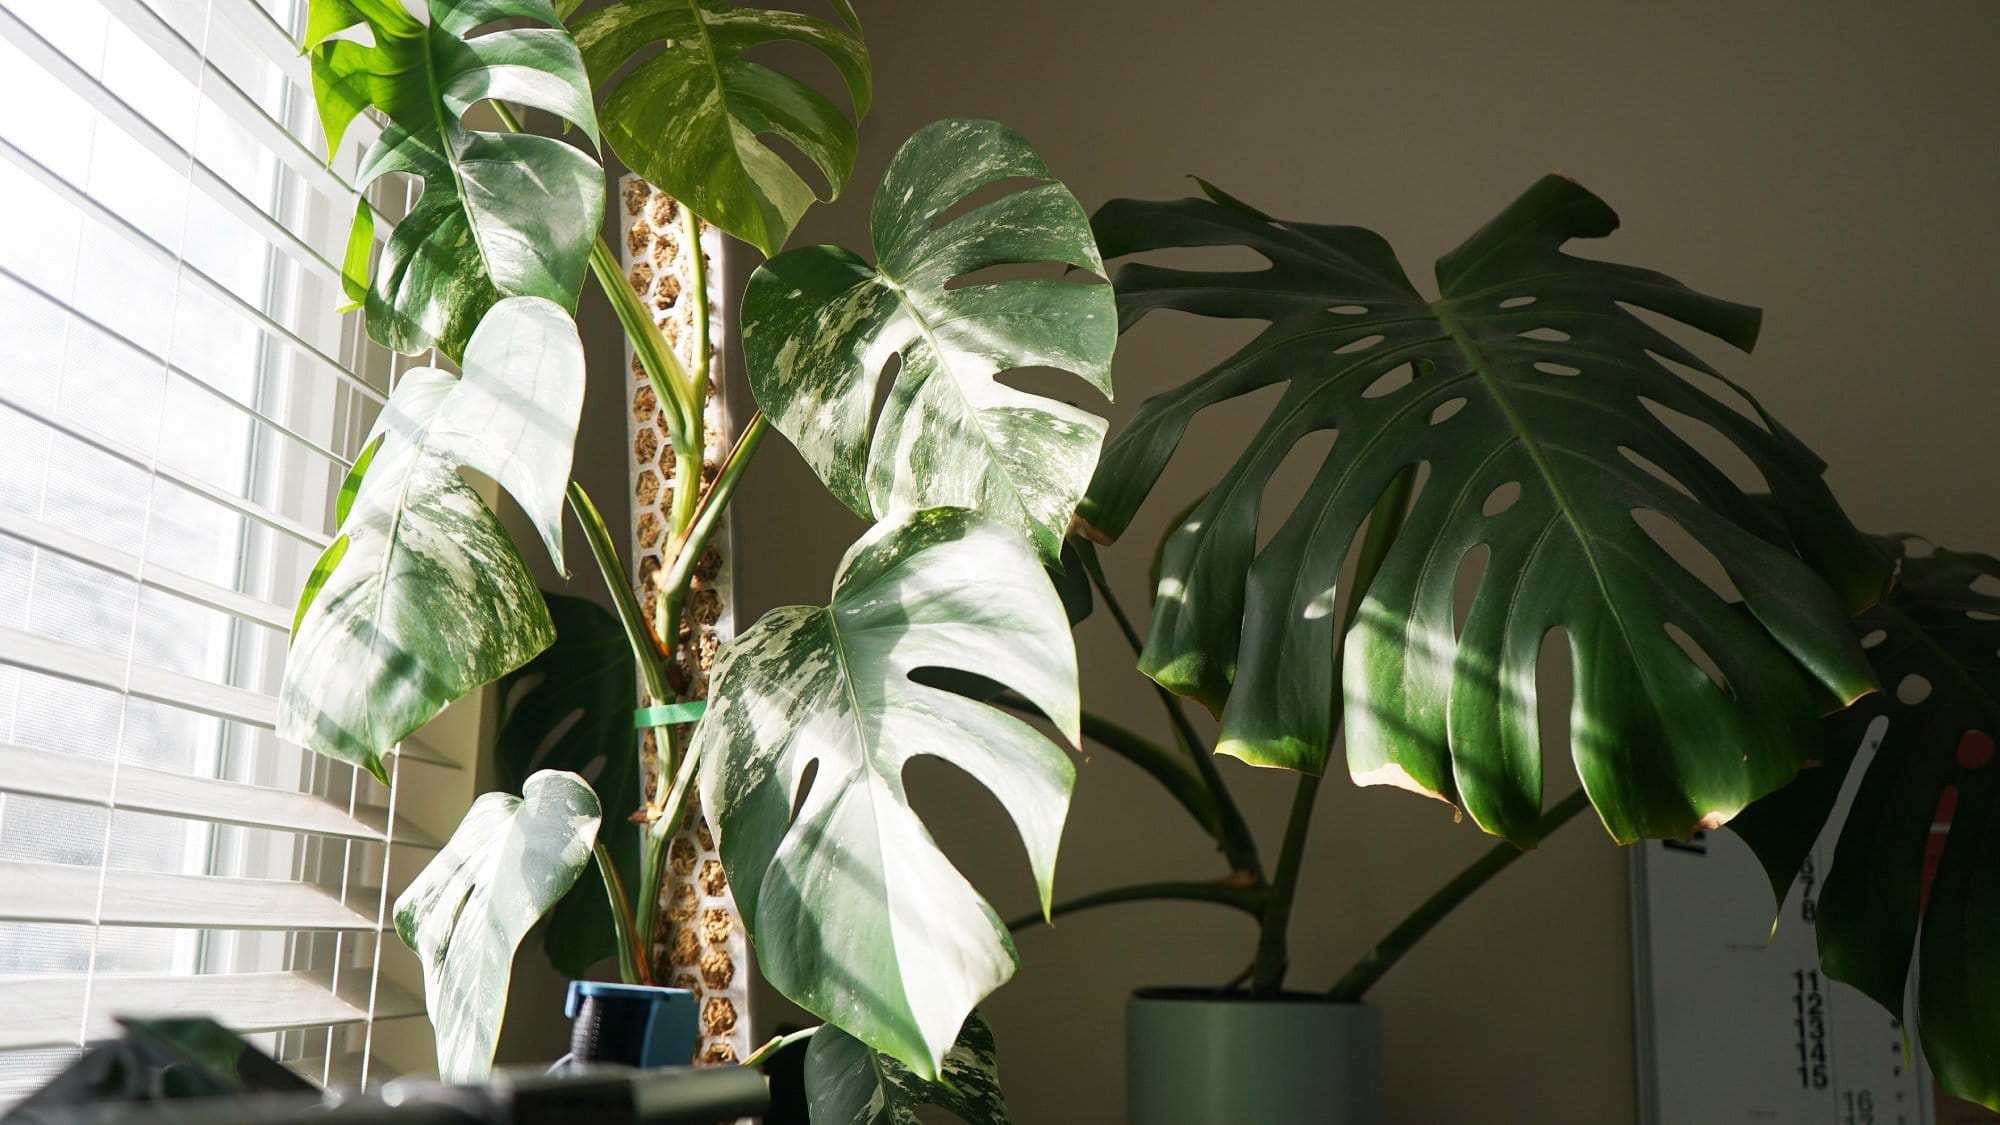 Indoor plants with large, variegated leaves are bathed in sunlight next to a window with blinds